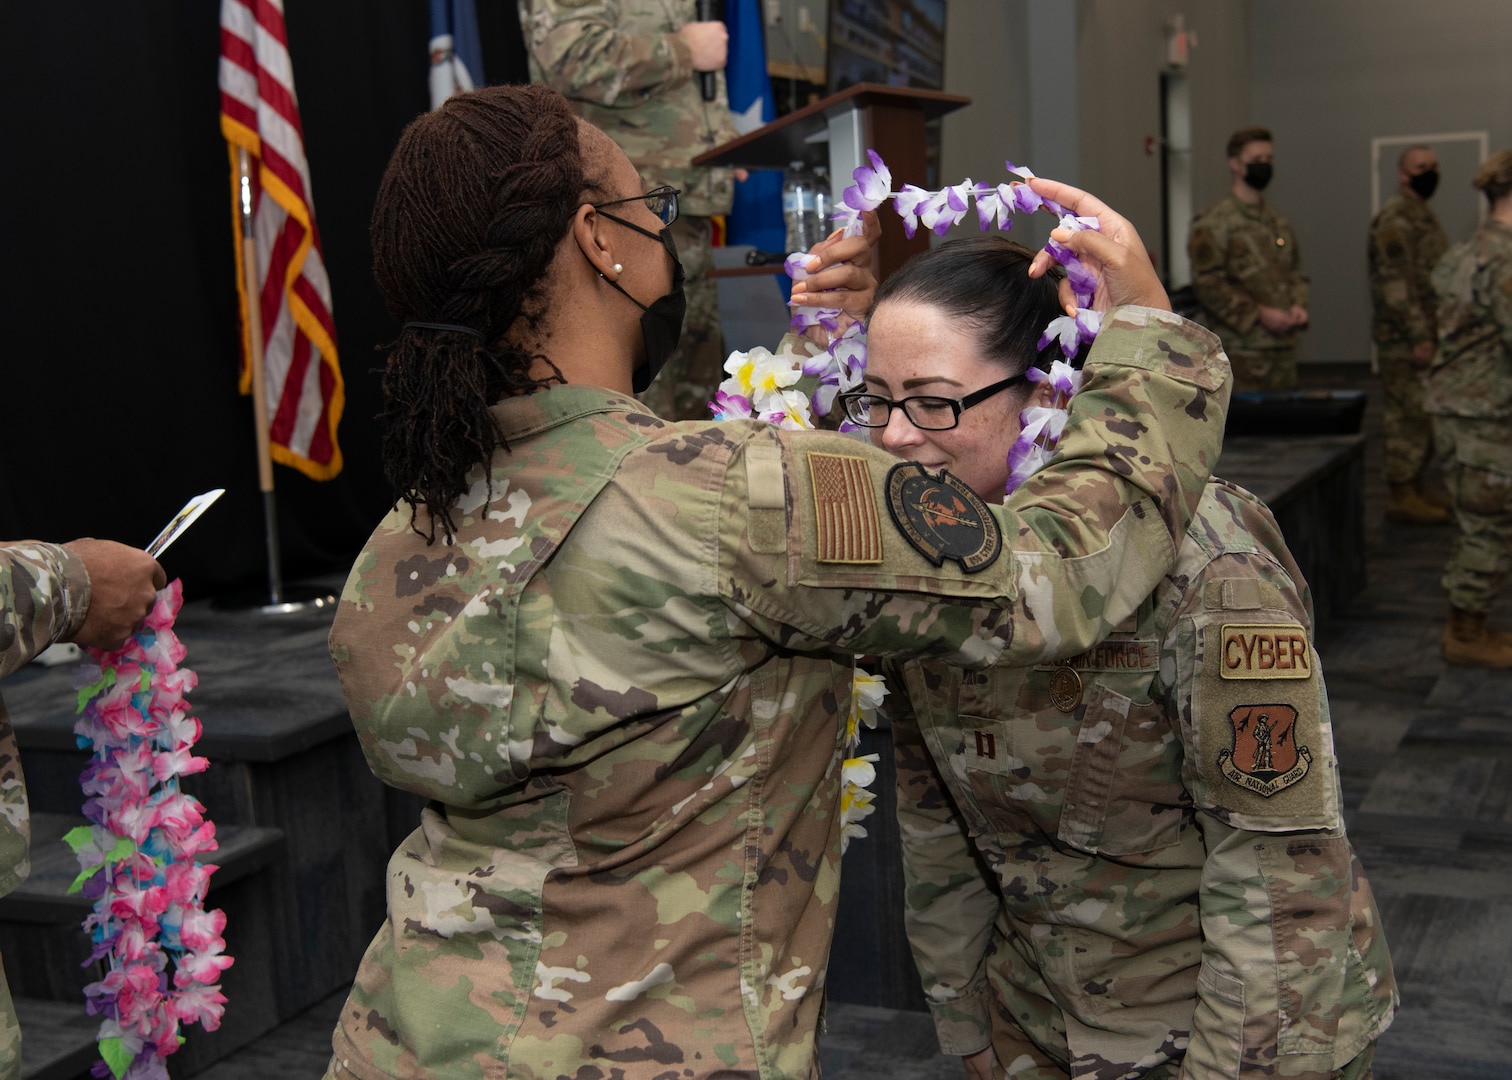 An Airman is presented with a lei at an end of mobilization ceremony Feb. 25, 2022, in Hampton, Virginia.